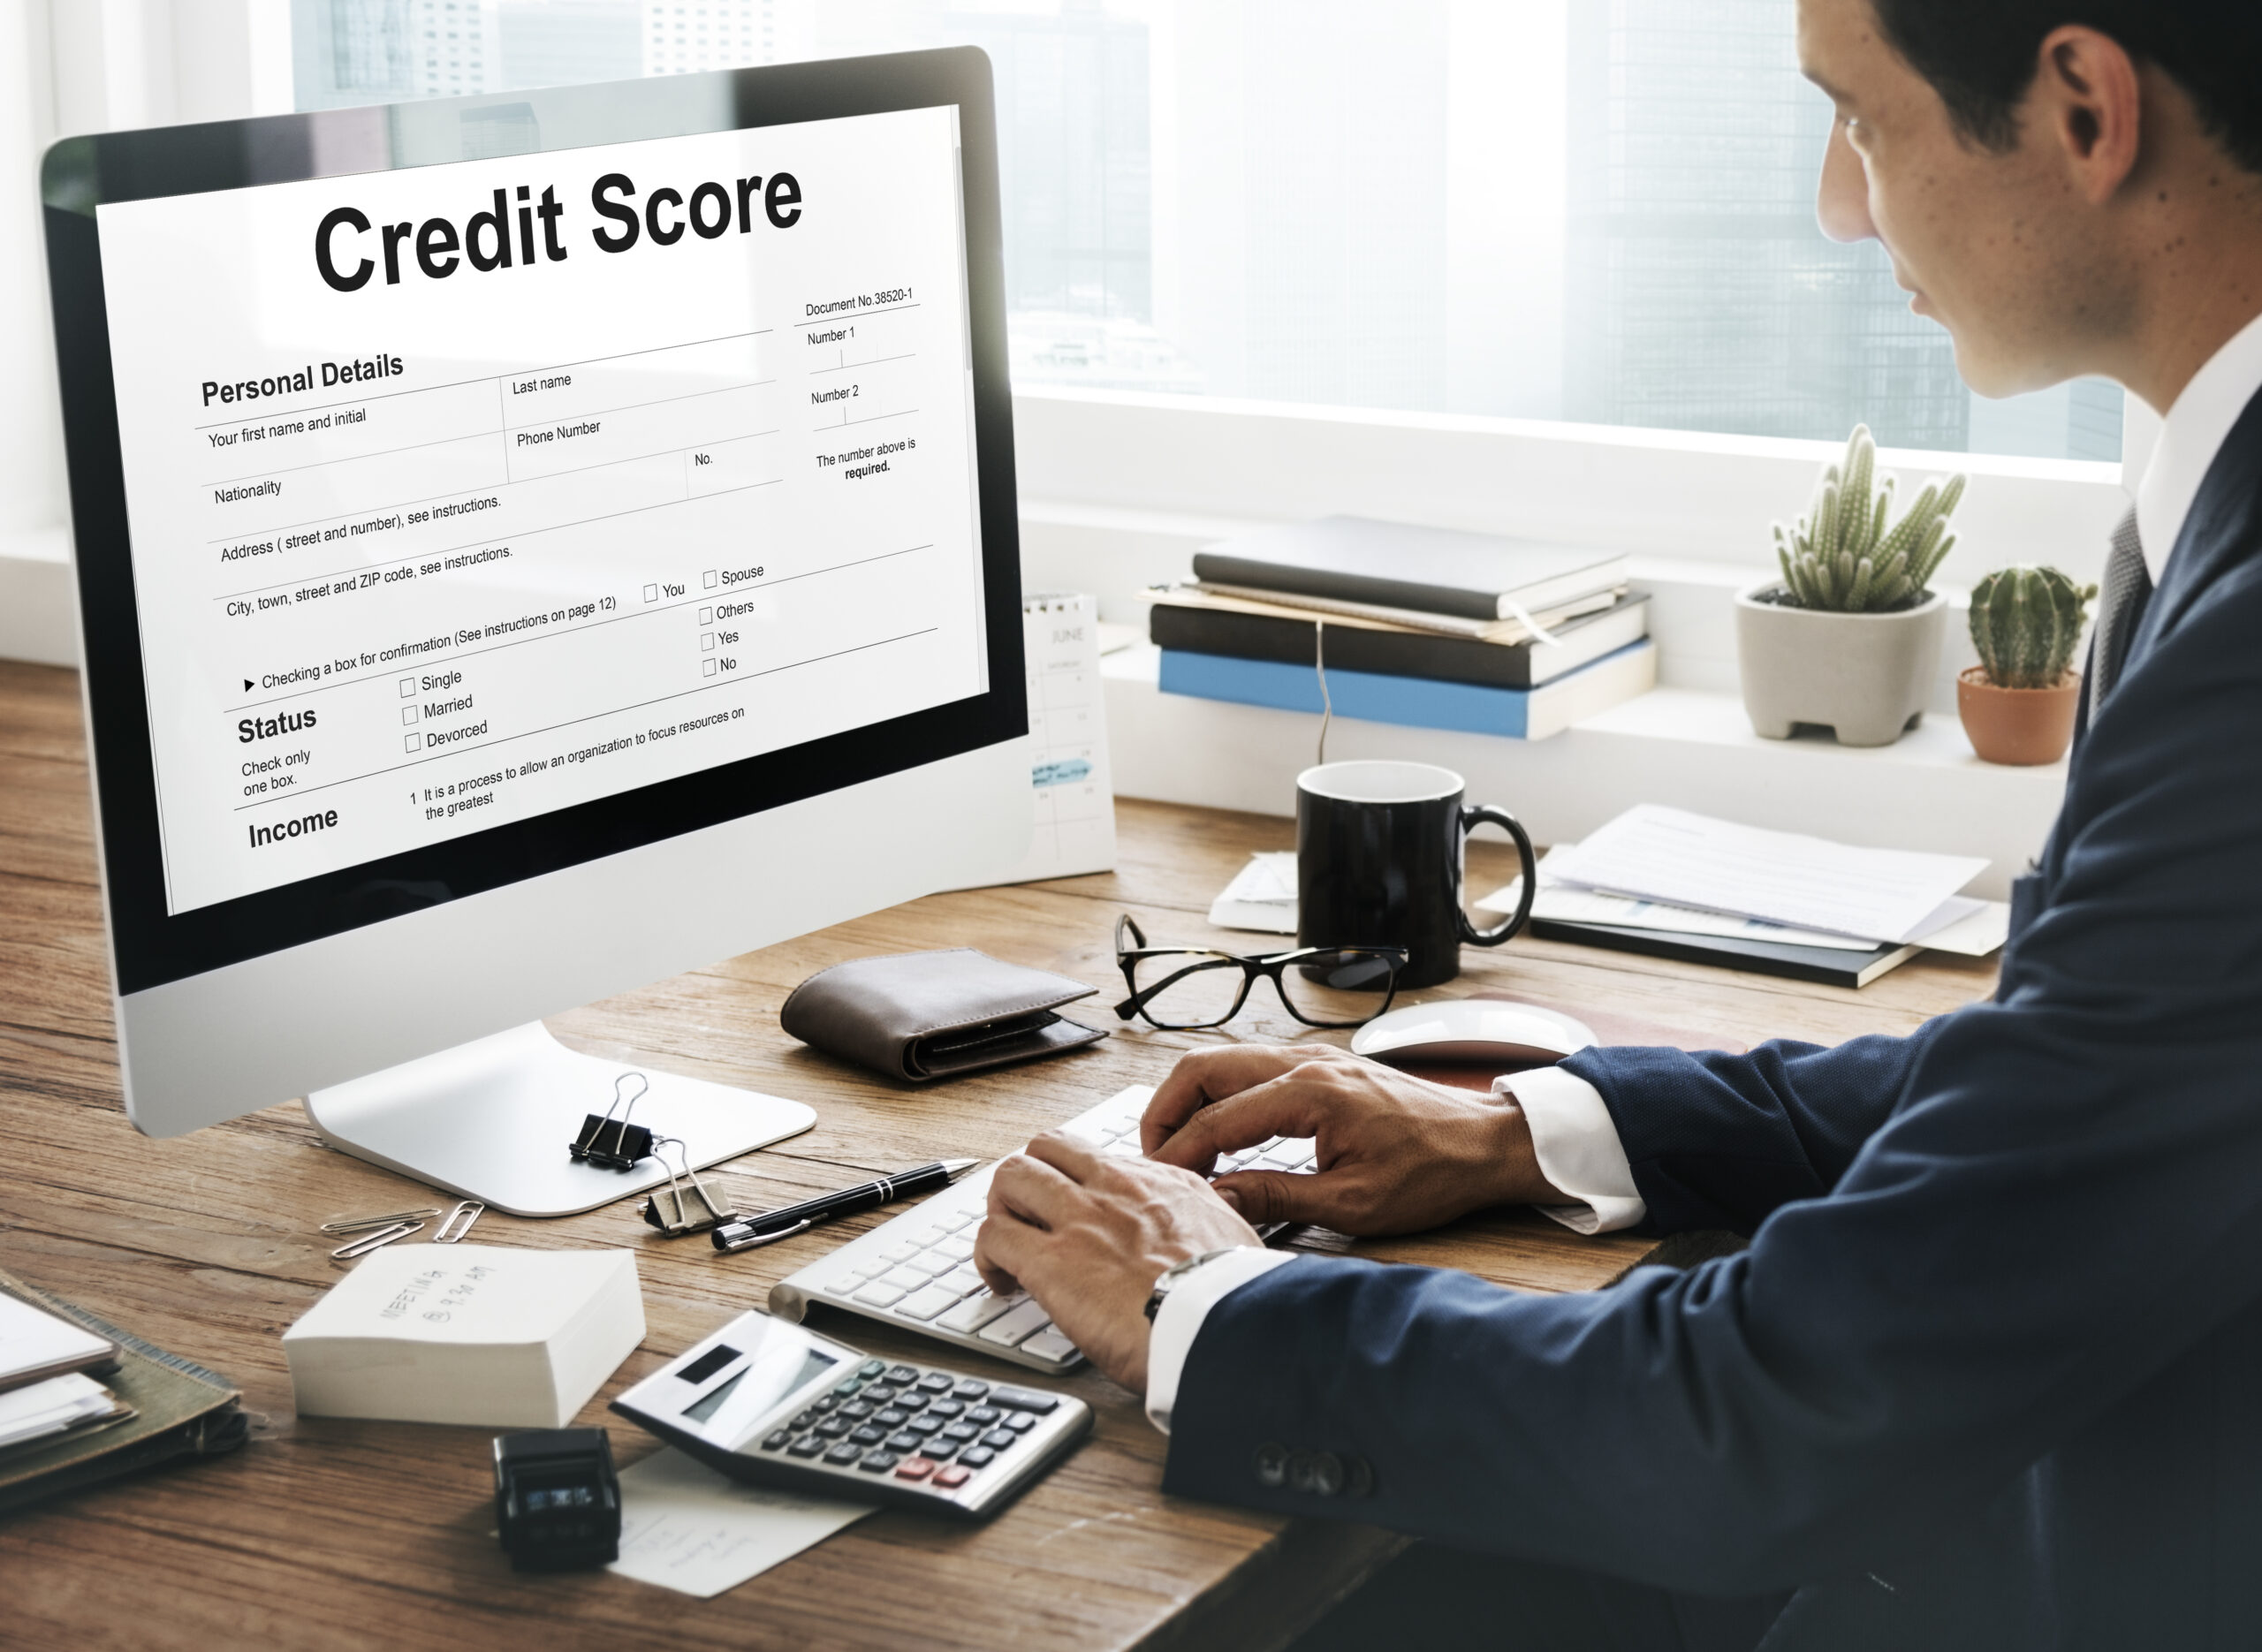 Credit scores and different loan types